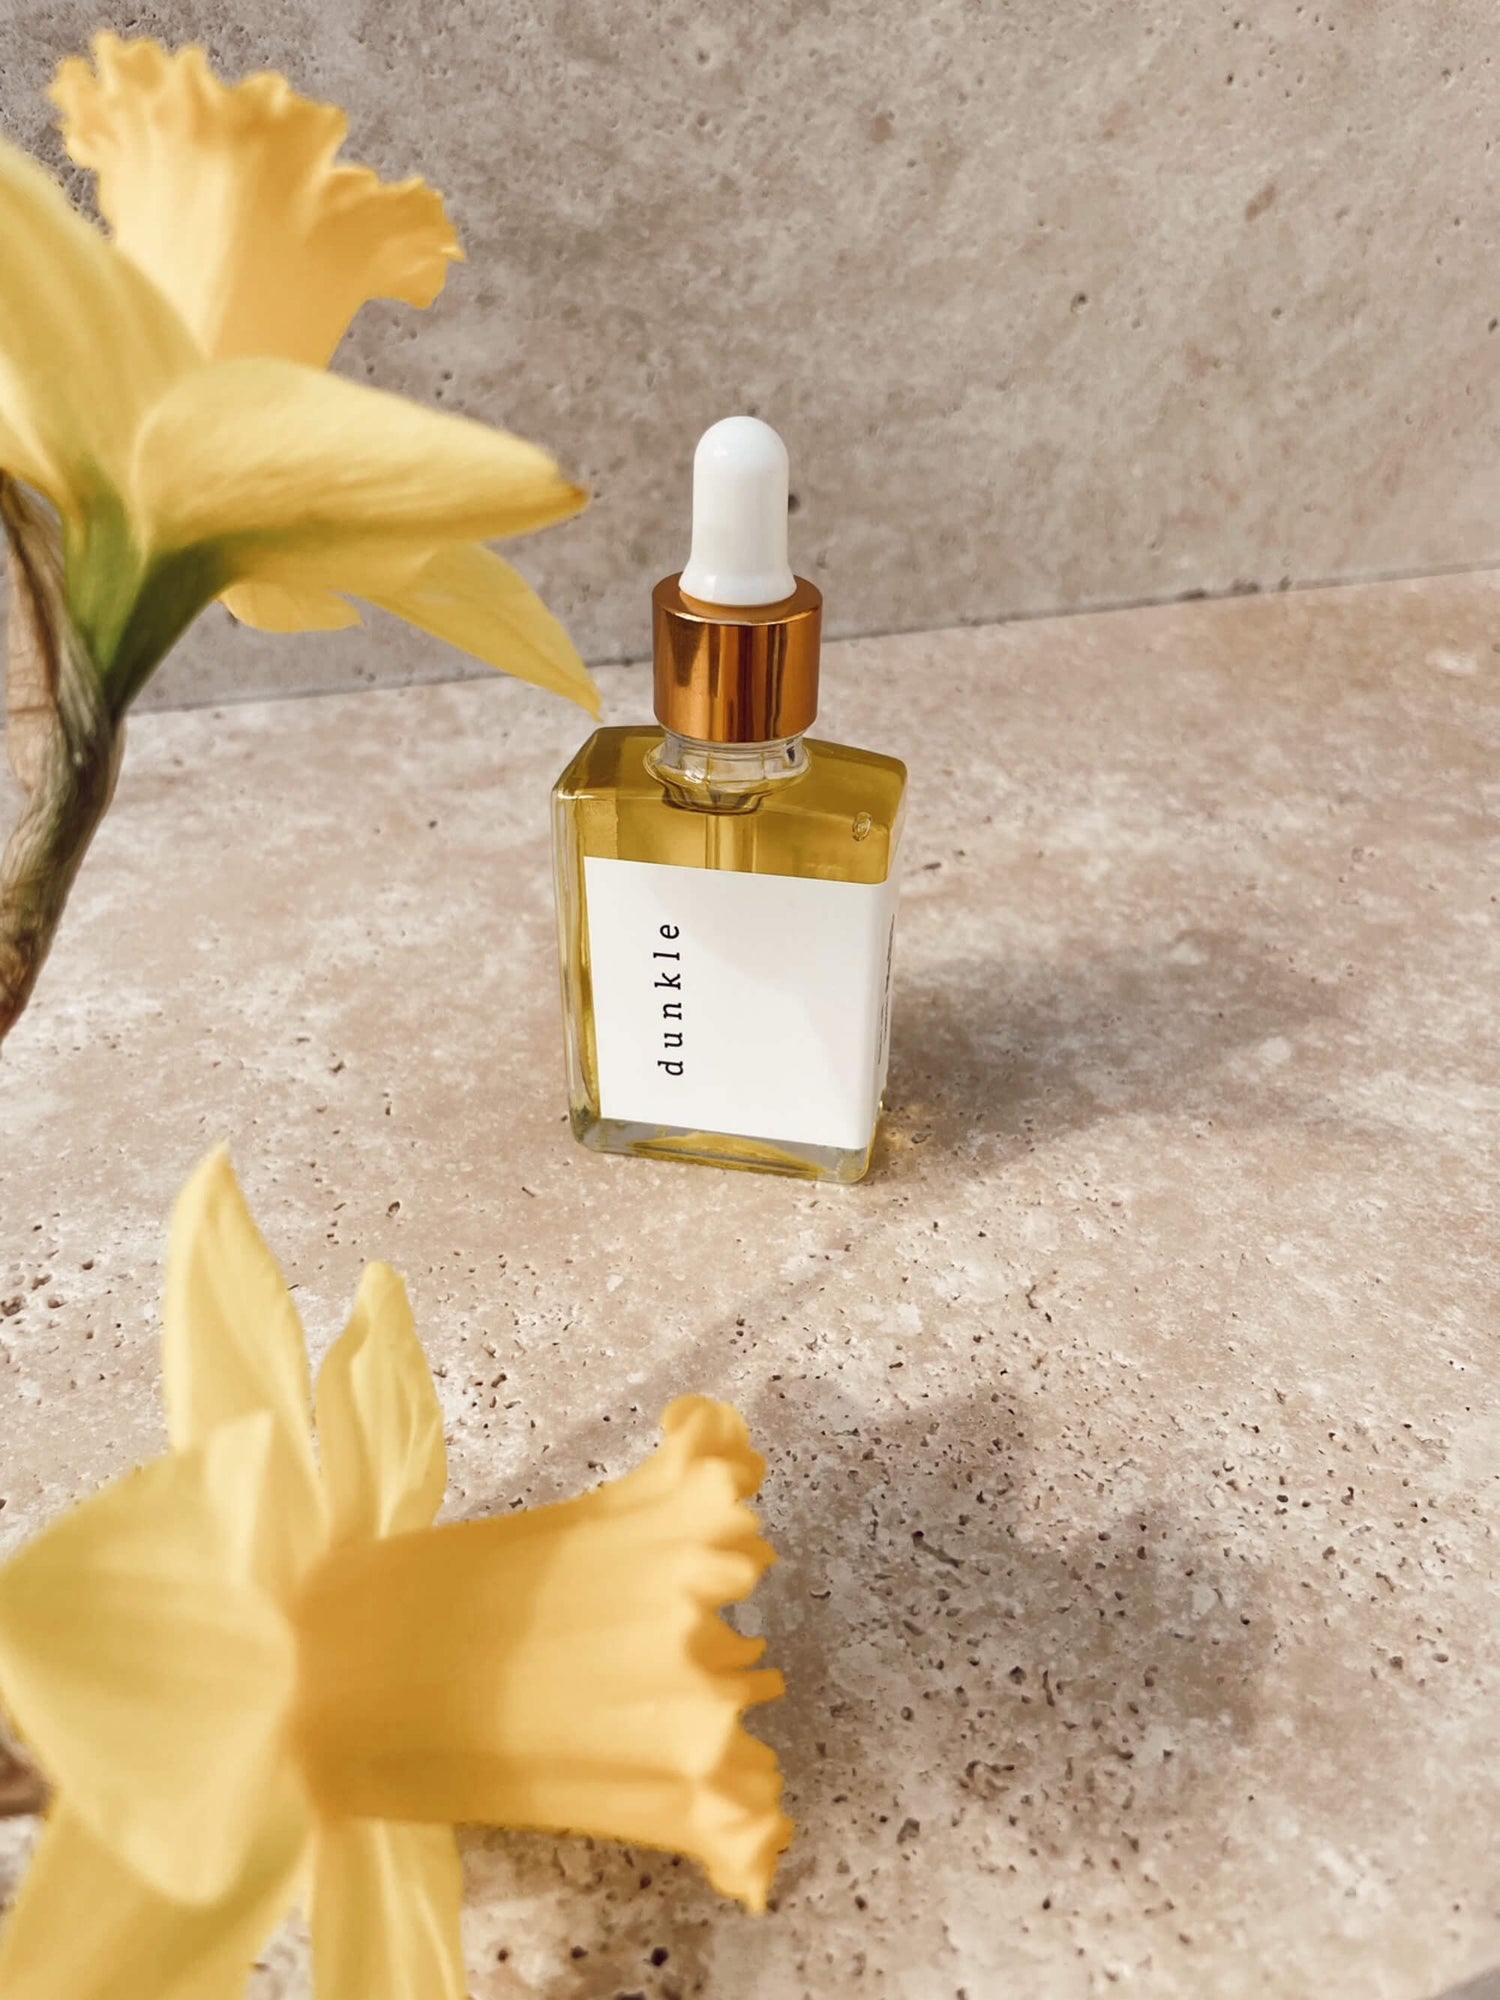 A bottle of Dunkle facial oil styled with Self Bloom yellow daffodils on a stone bathroom benchtop.